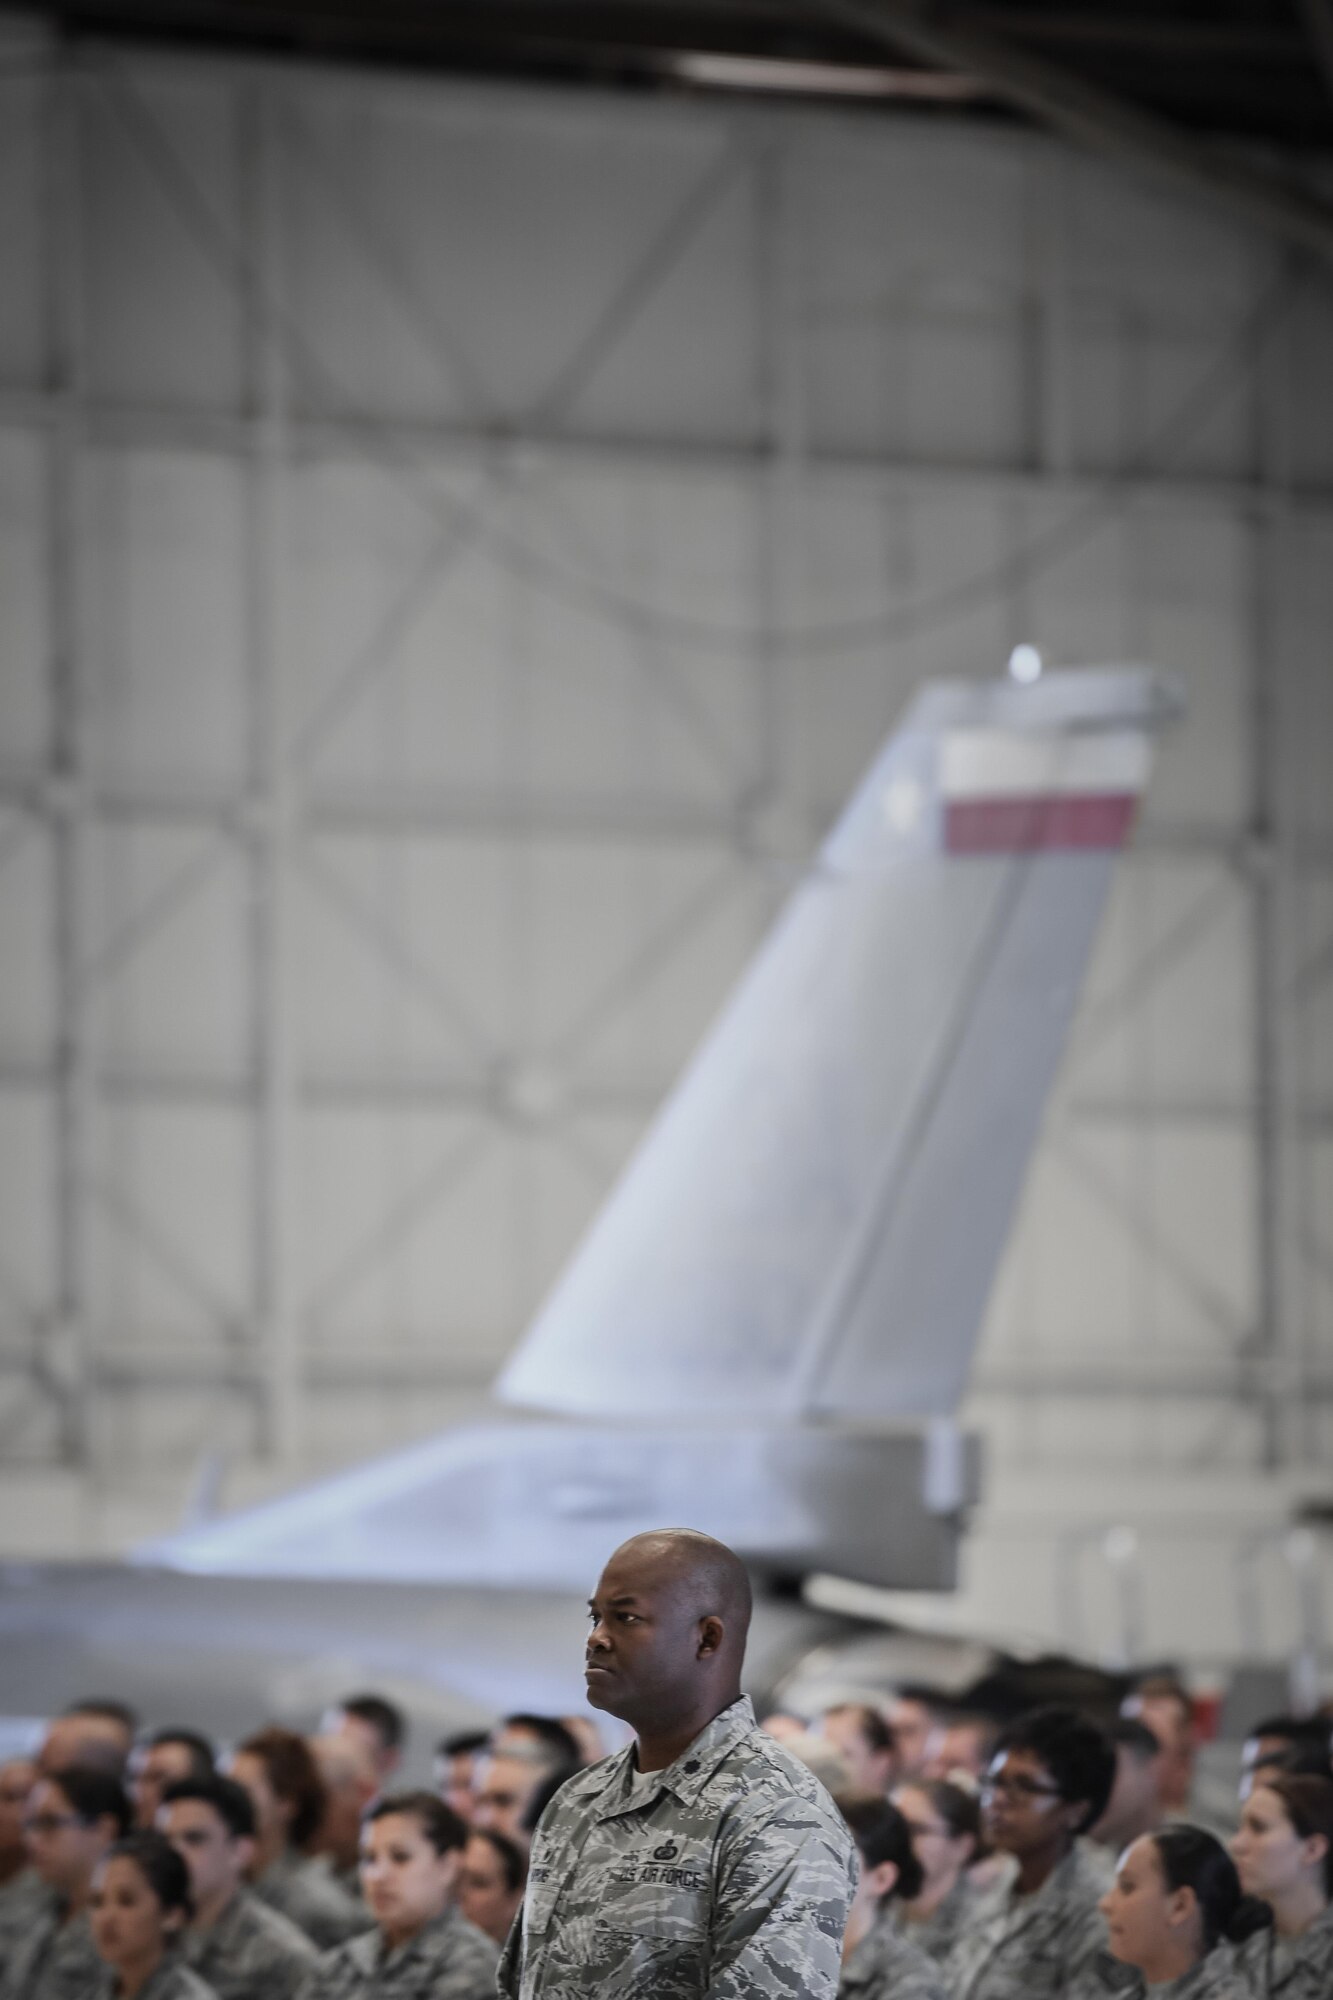 Lt. Col. Antwan Hopkins, wing chief of staff and comptroller flight commander, serves as the flight commander for a formation of the 149th Fighter Wing, Texas Air National Guard during a retirement ceremony honoring Command Chief Master Sgt. George Longoria at Joint Base San Antonio-Lackland, Texas, Feb. 25, 2017. Longoria retires after 35 years of military service. (U.S. Air National Guard photo by Tech. Sgt. Eric L. Wilson)